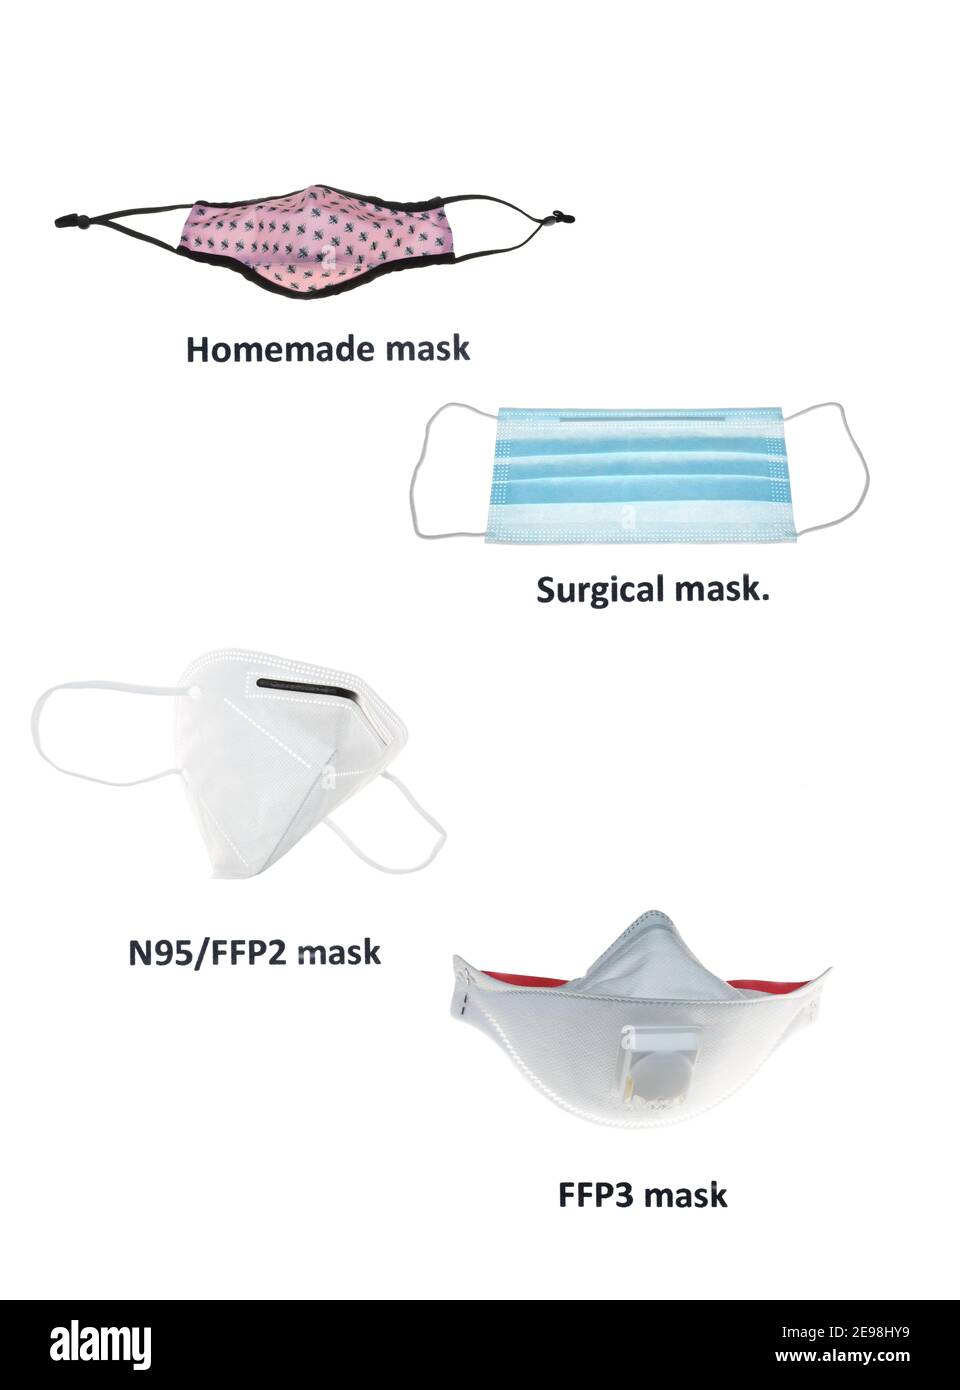 Four masks giving different grades of protection against Covid-19, fabric face covering, surgical mask, N95, FFP2 mask and FFP3 mask. Stock Photo